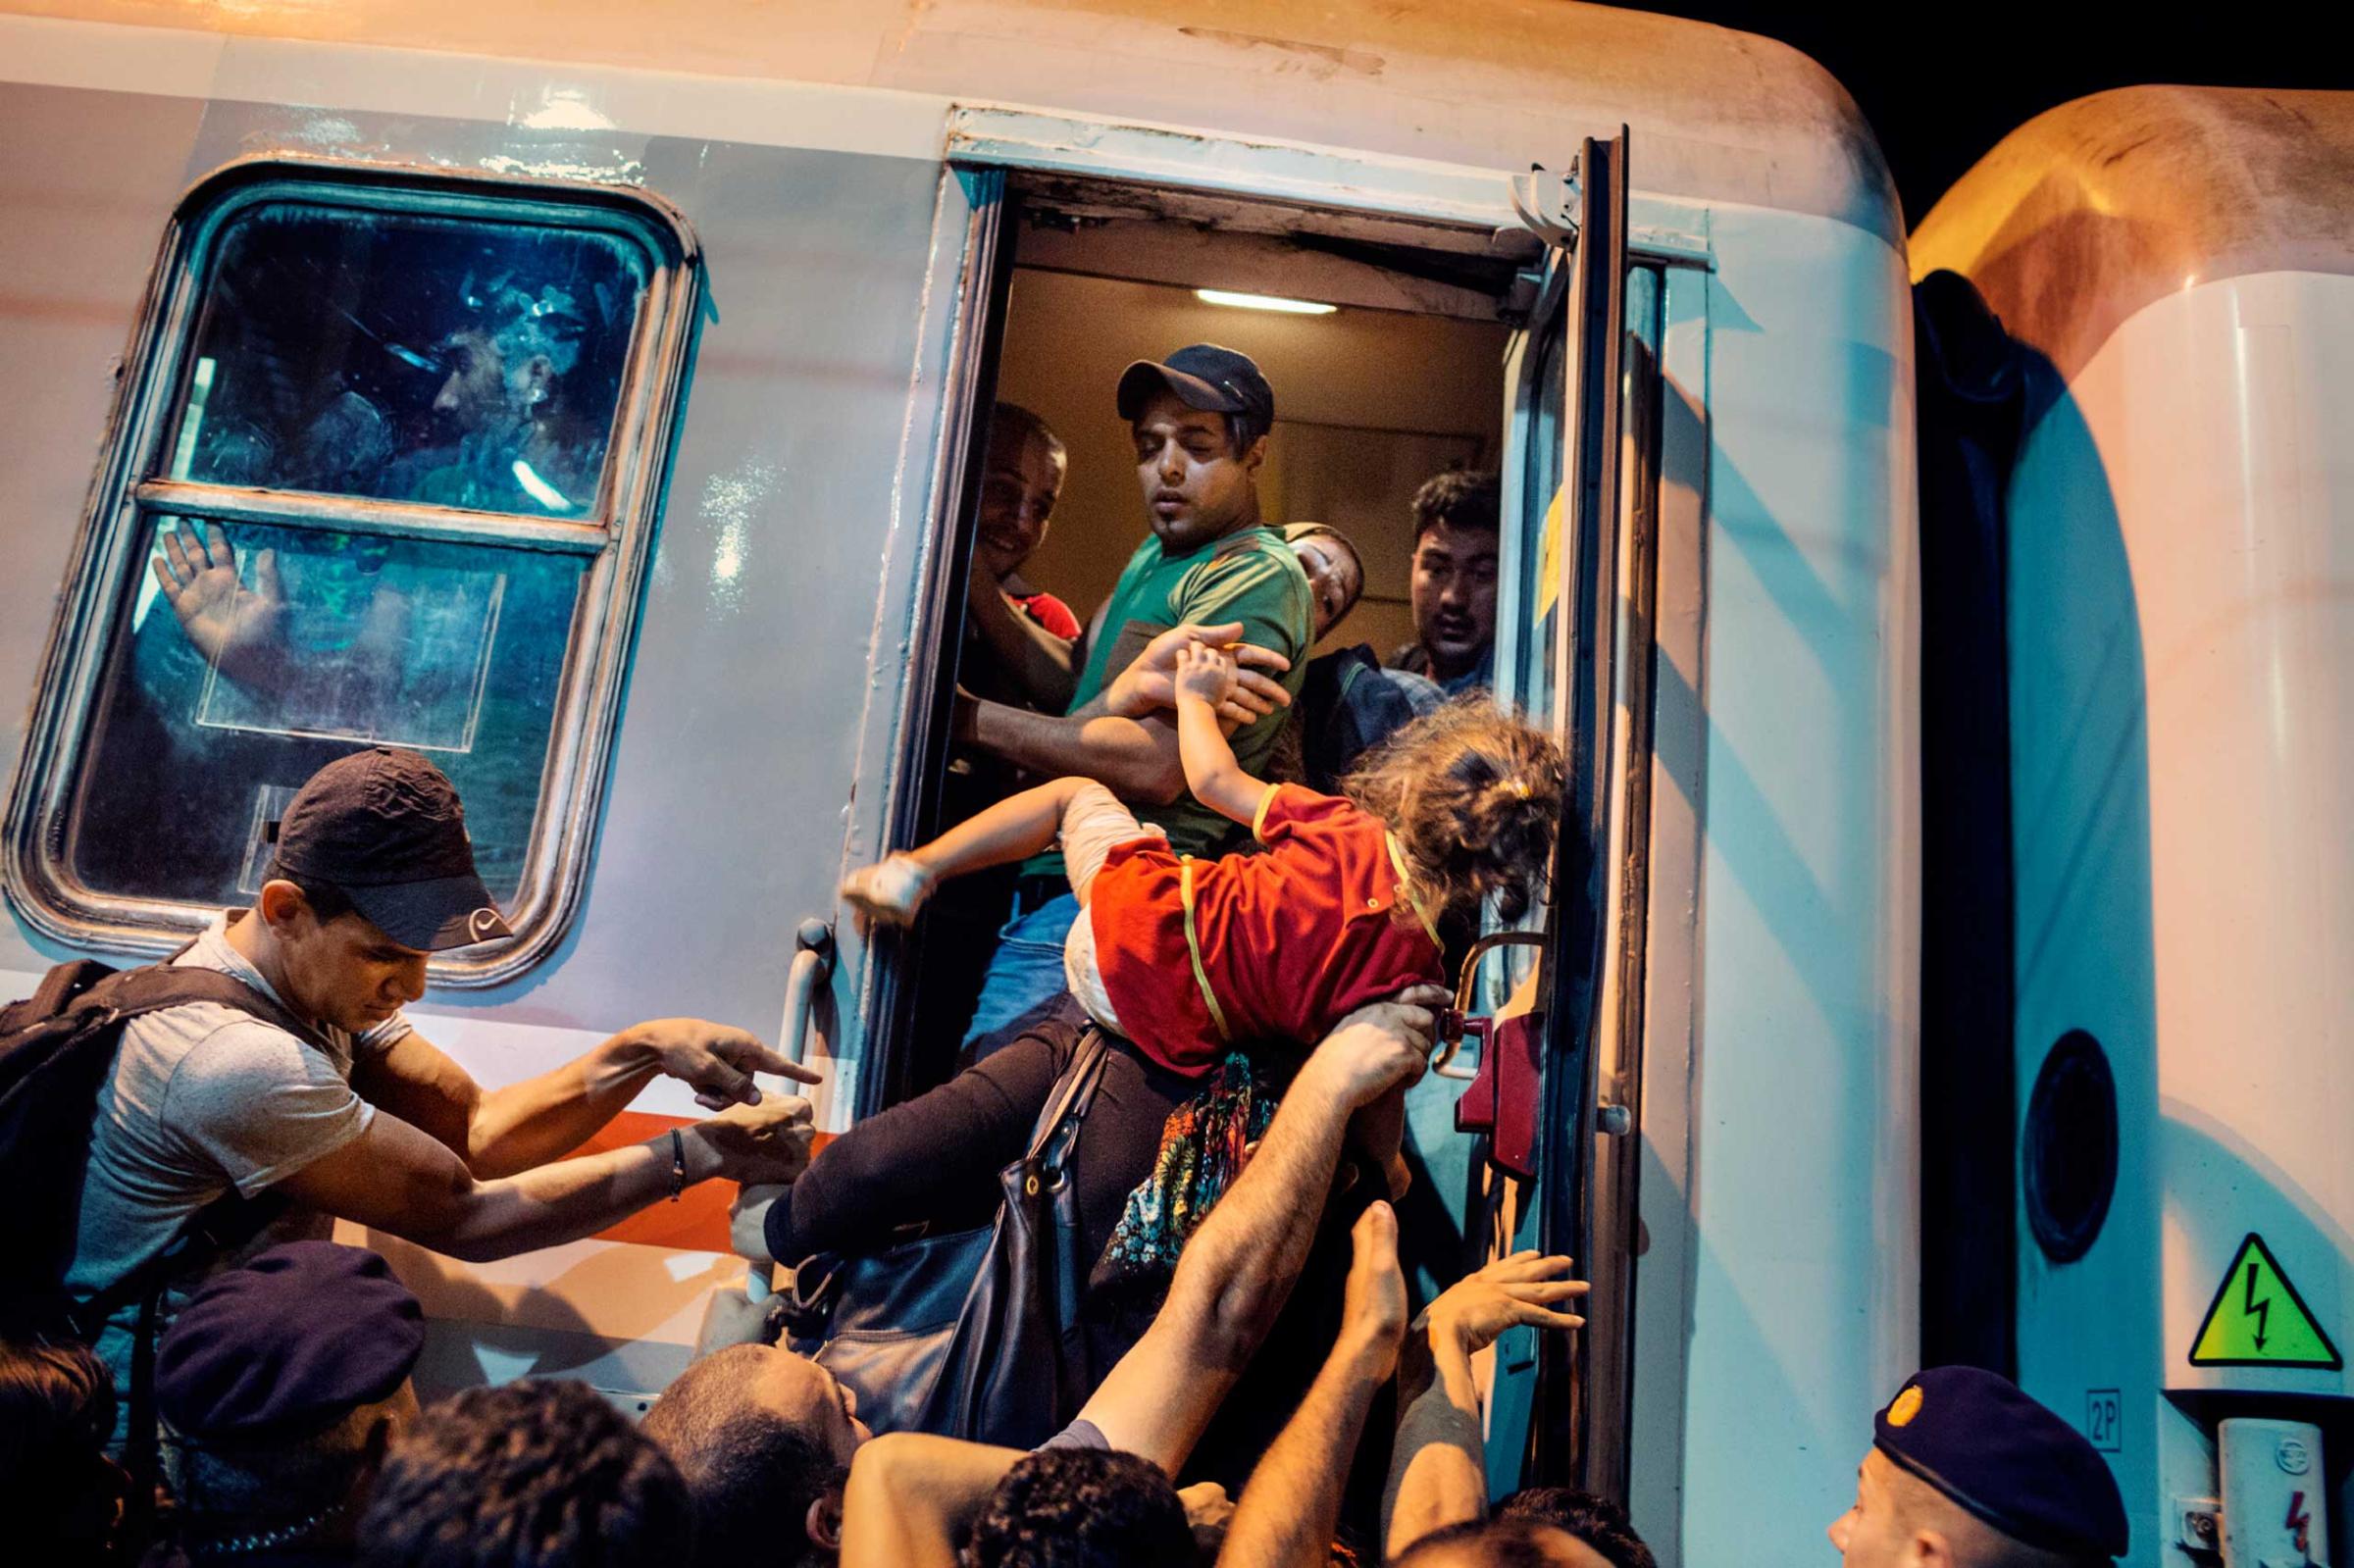 Refugees, asylum seekers and migrants attempt to board a train at the Croatian town of Tovarnik, near the border with Serbia. Some have been waiting for days to catch a train and families have been separated in the chaos. Tovarnik, Croatia, Sept. 20, 2015.